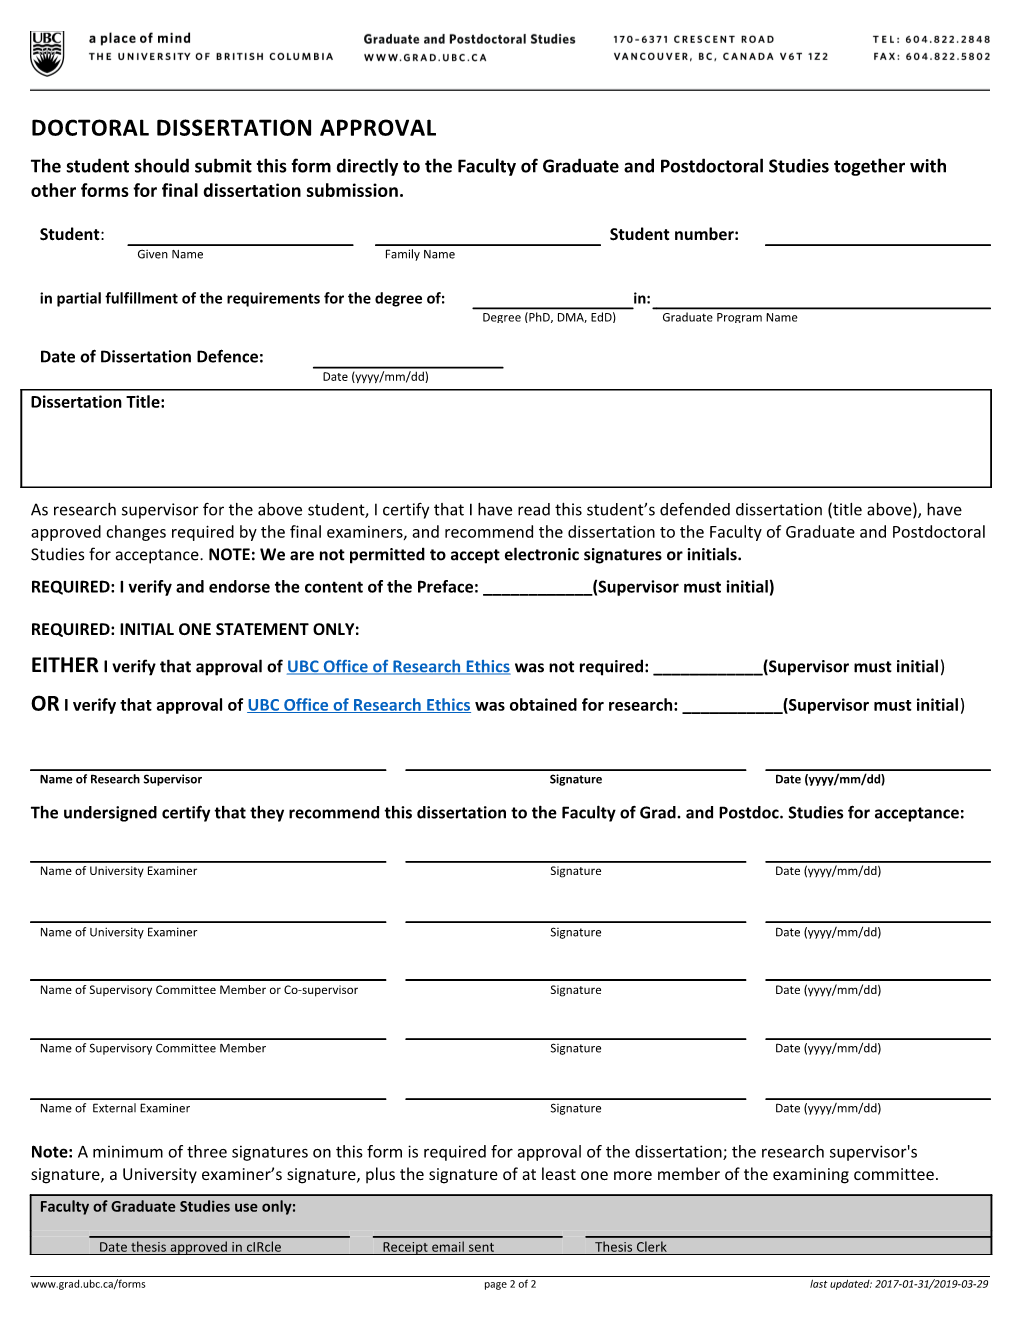 Doctoral Dissertation Approval Form Instructions